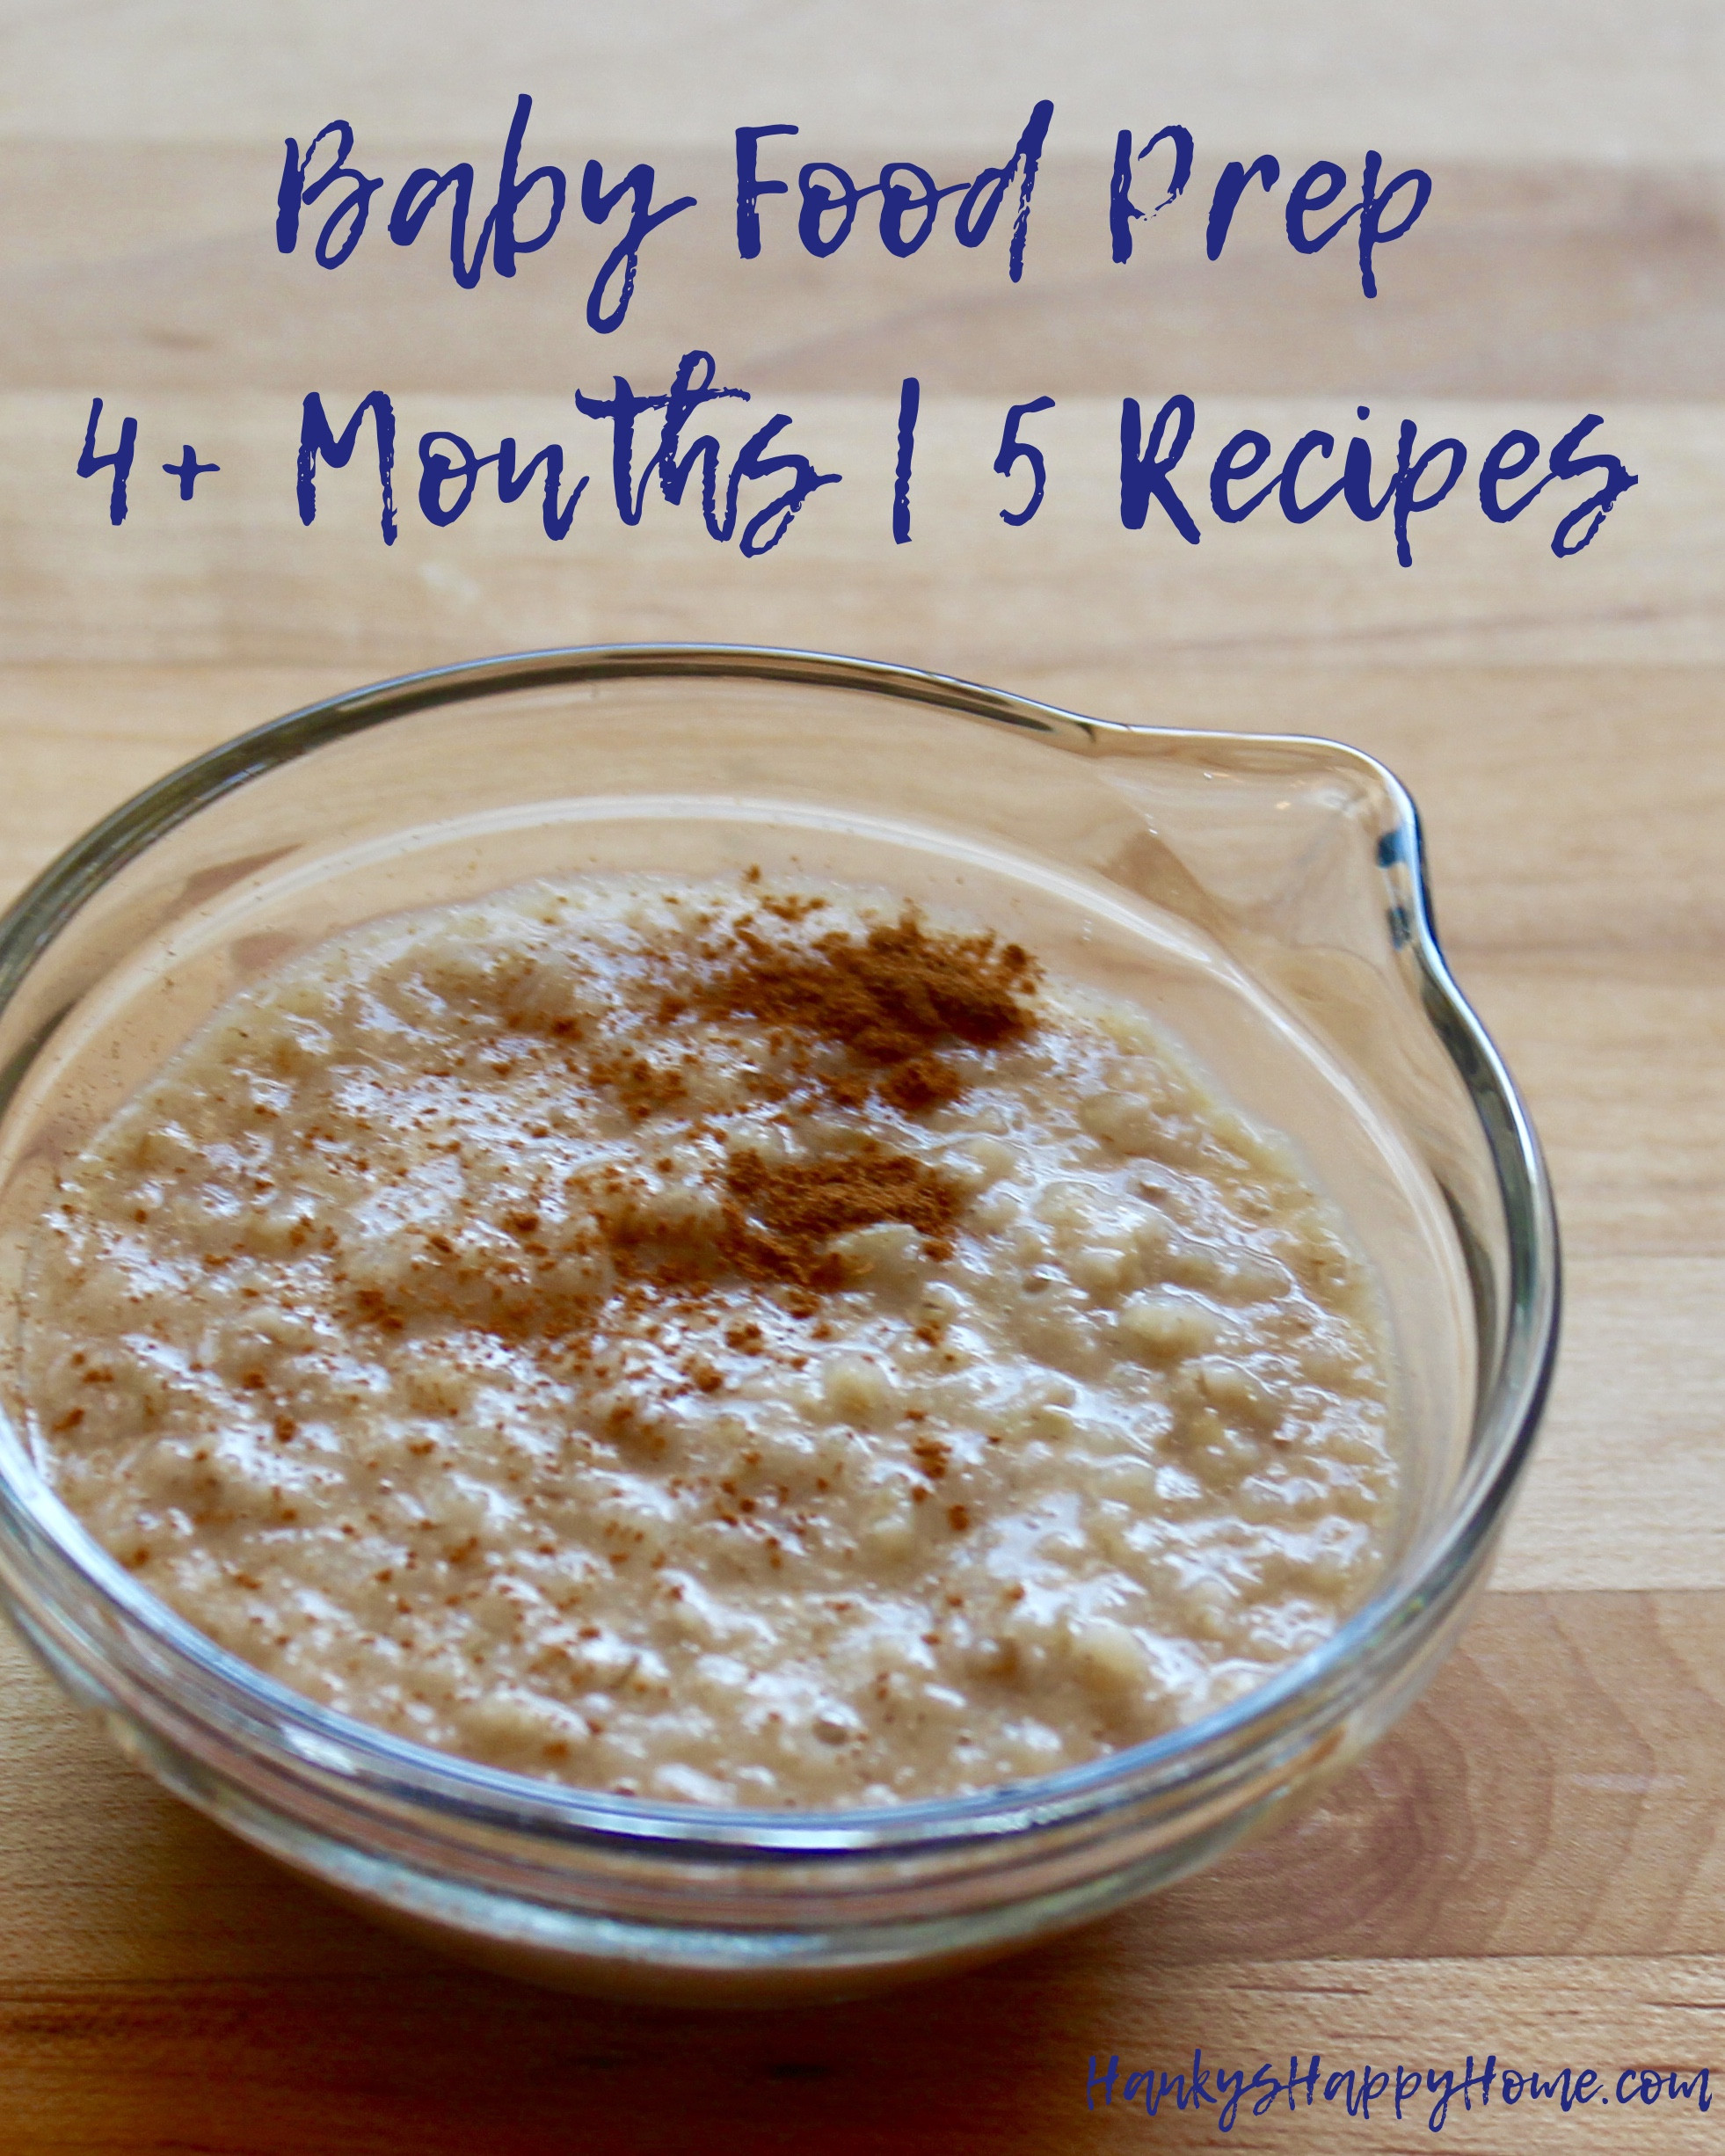 Baby Food Recipes 5 Months
 Baby Food Prep 4 Months